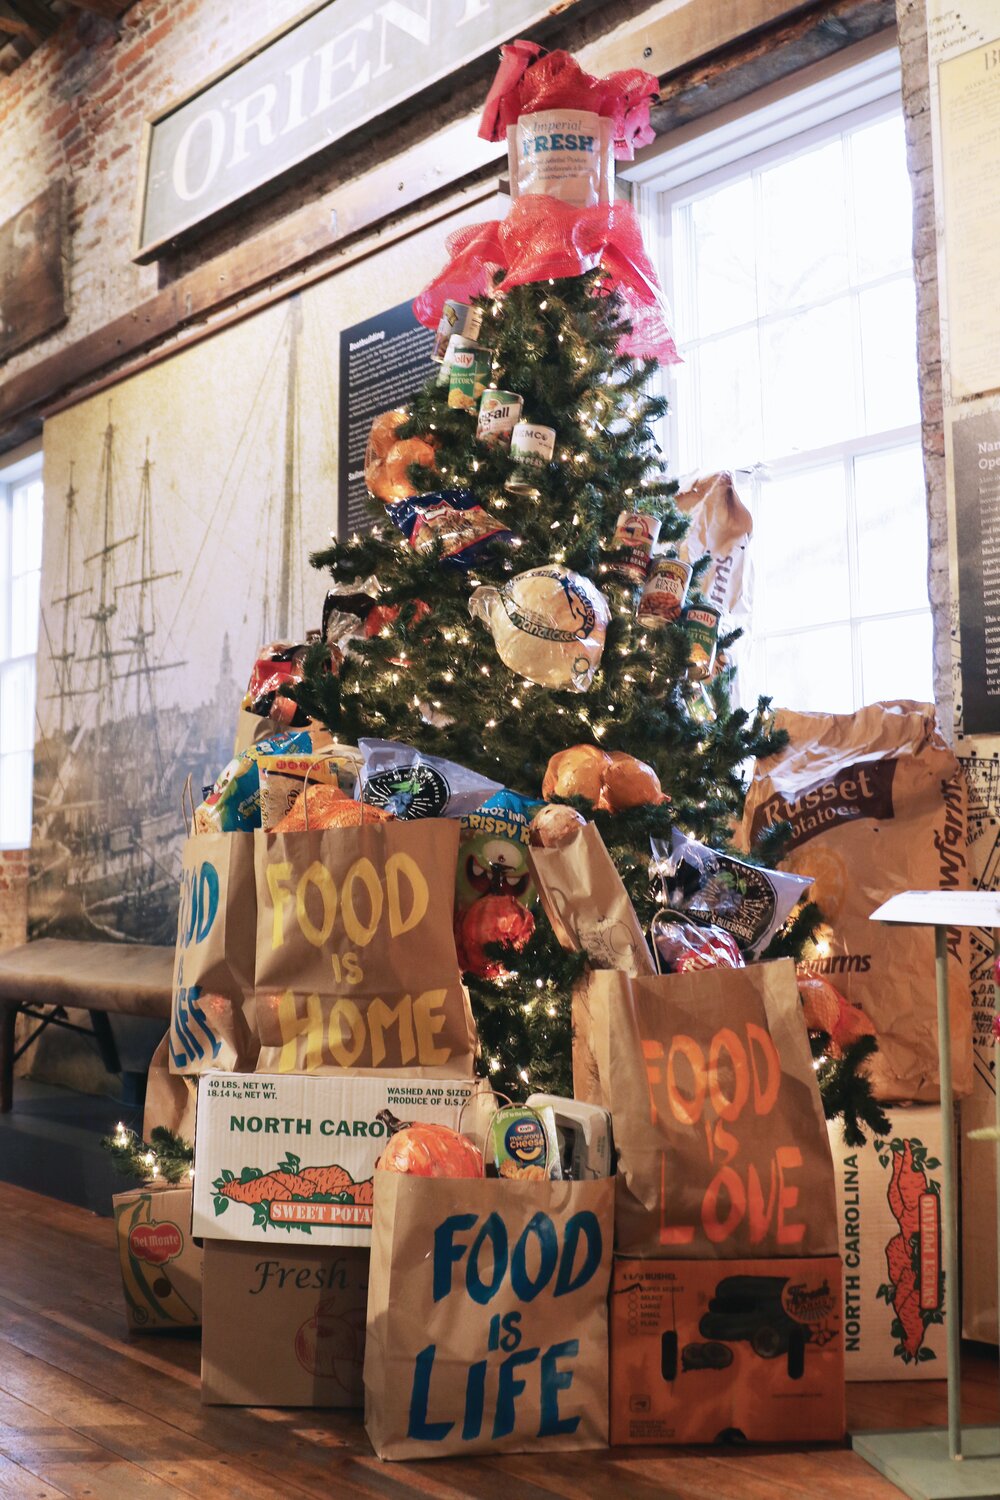 Tree decorated by the Nantucket Food Pantry.